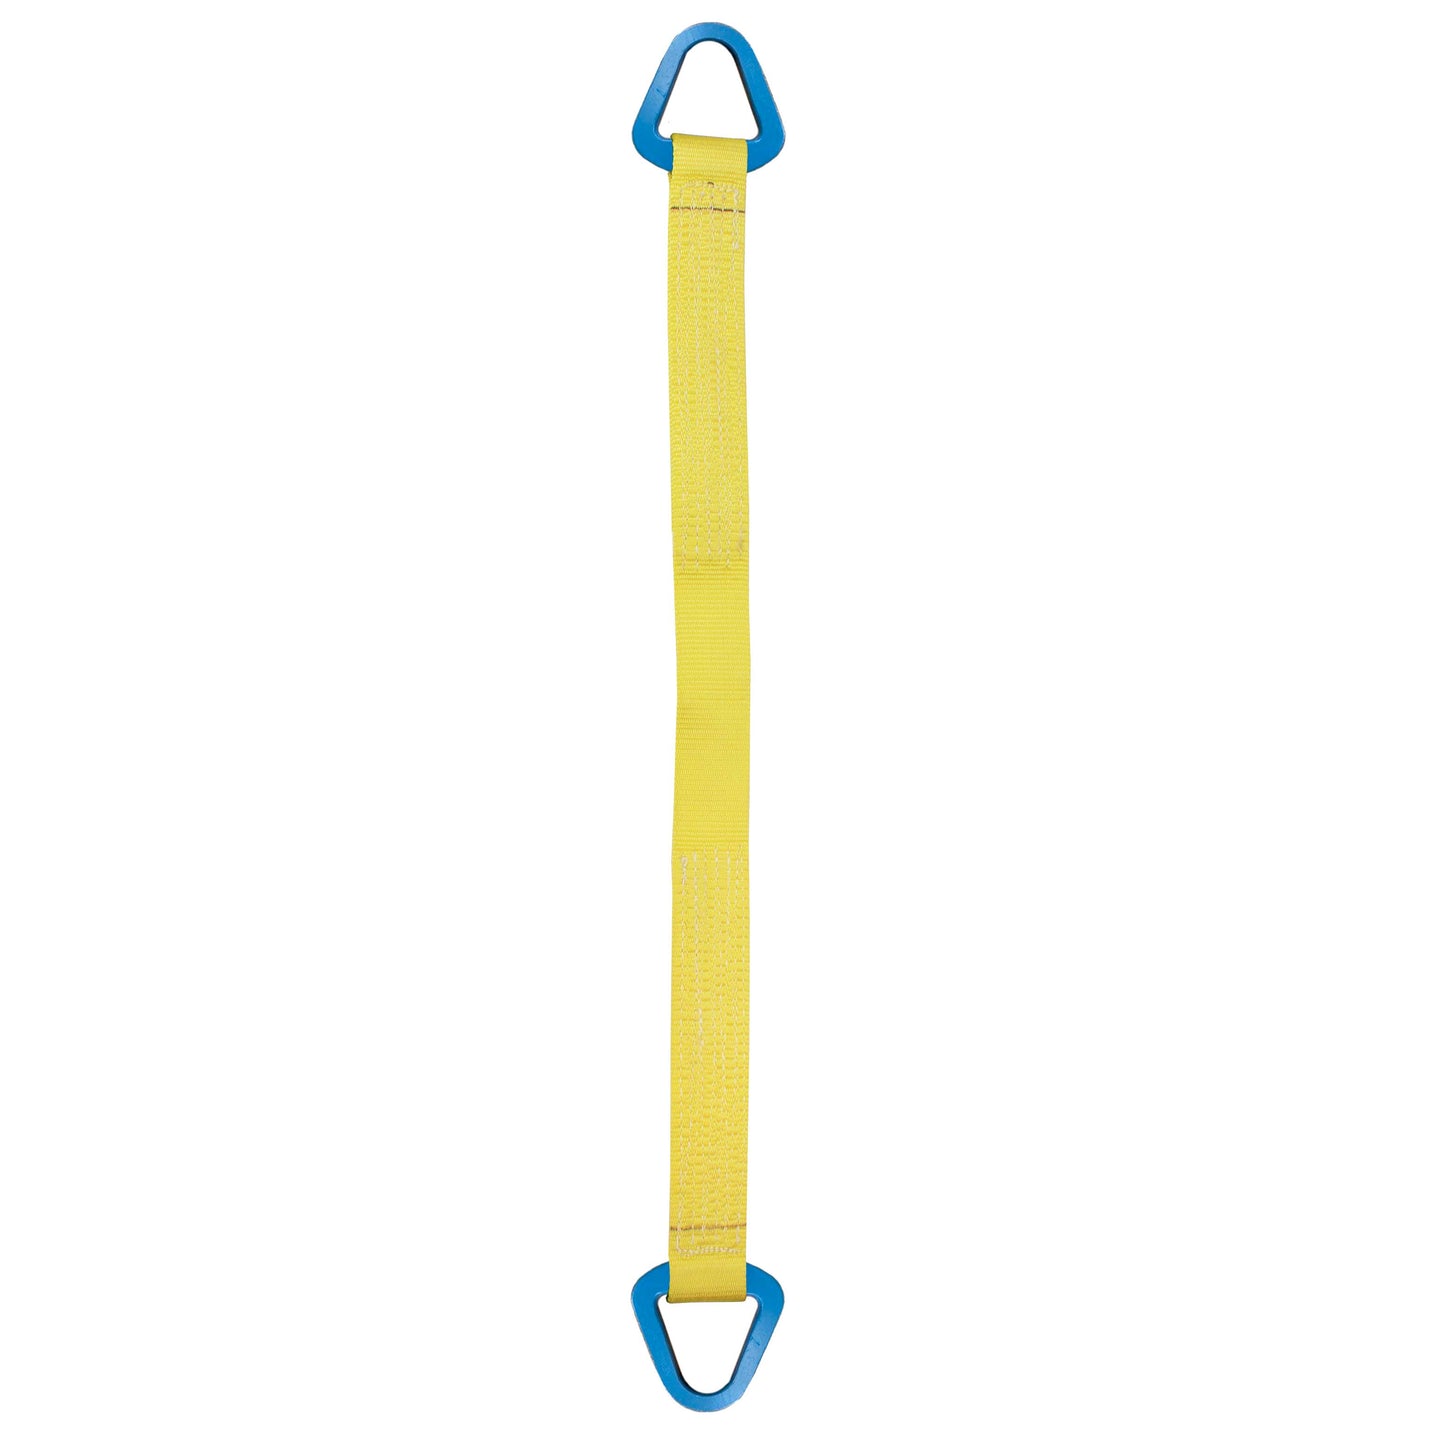 Nylon Lifting Sling Triangle 2 inch x 4 foot 2ply image 1 of 2